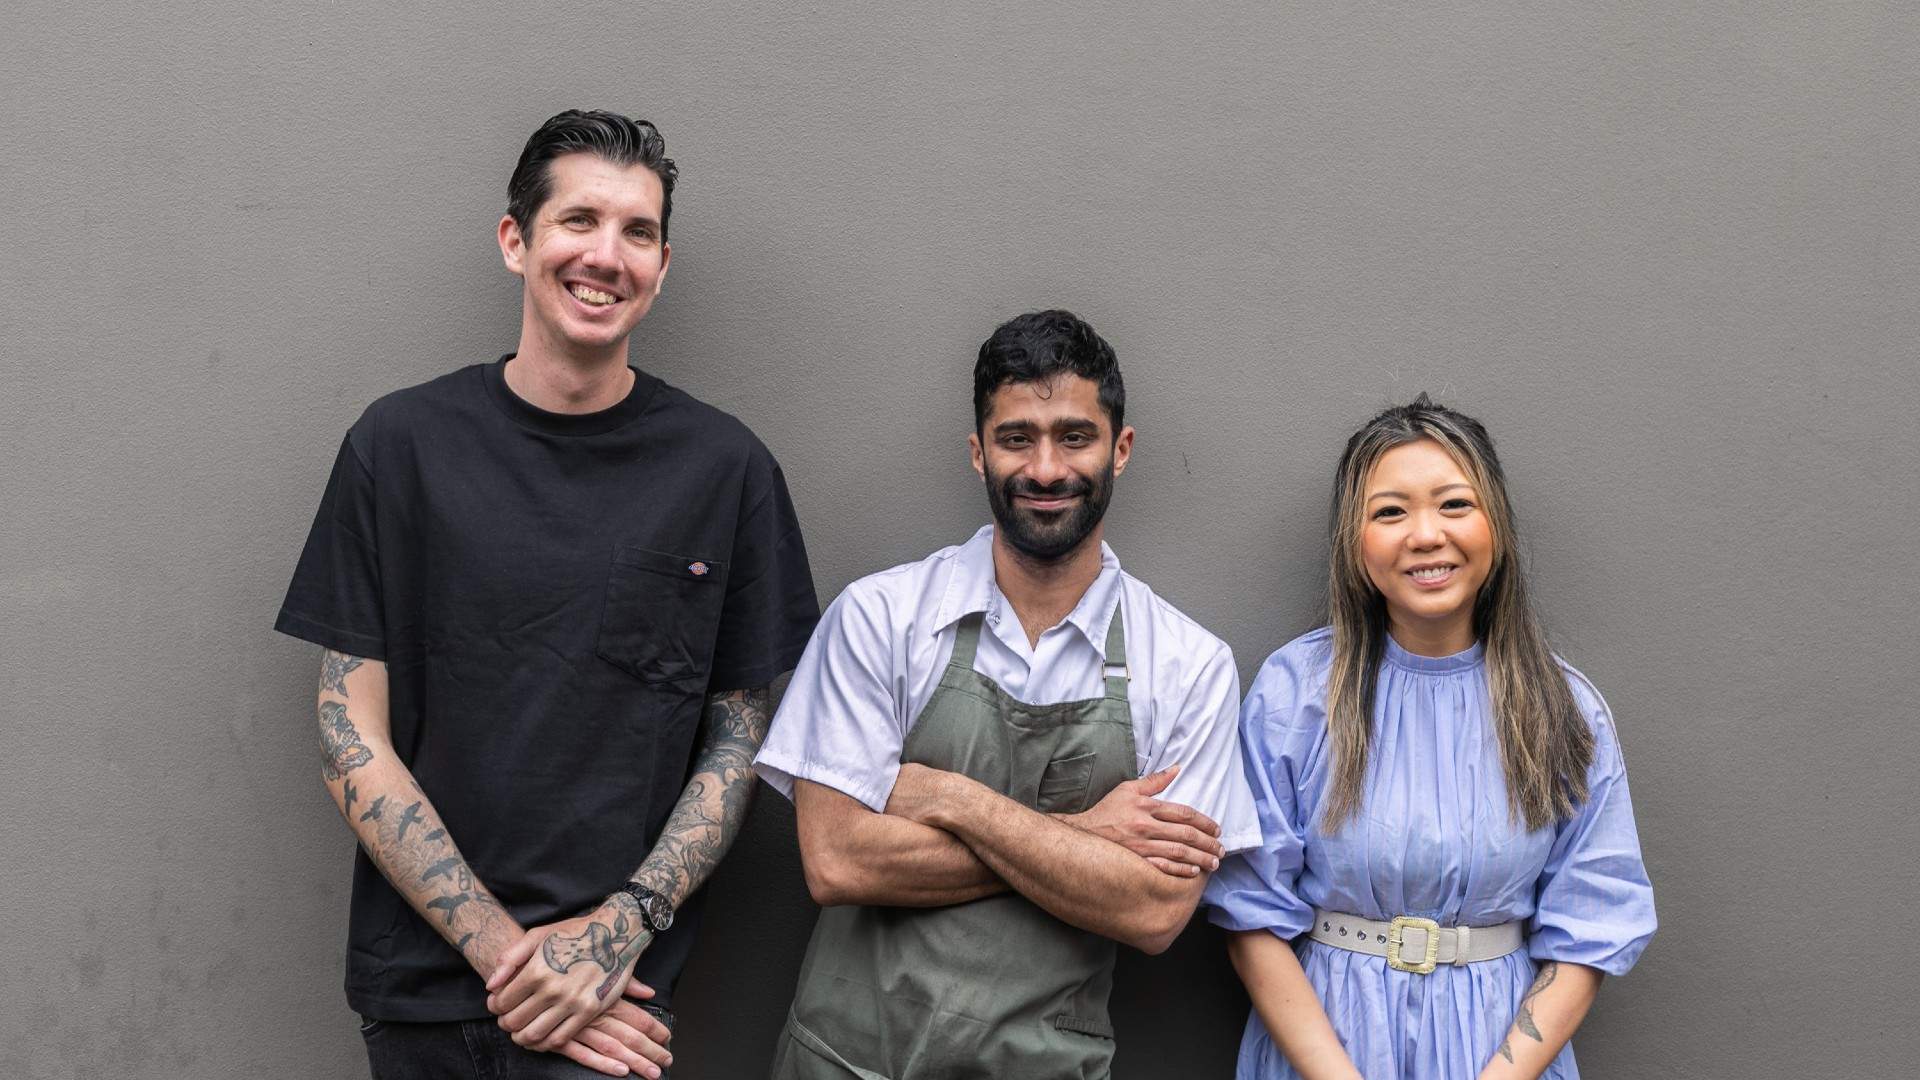 Irene's Enmore Is the New Neighbourhood Diner Moving Into the Former Home of Hartsyard